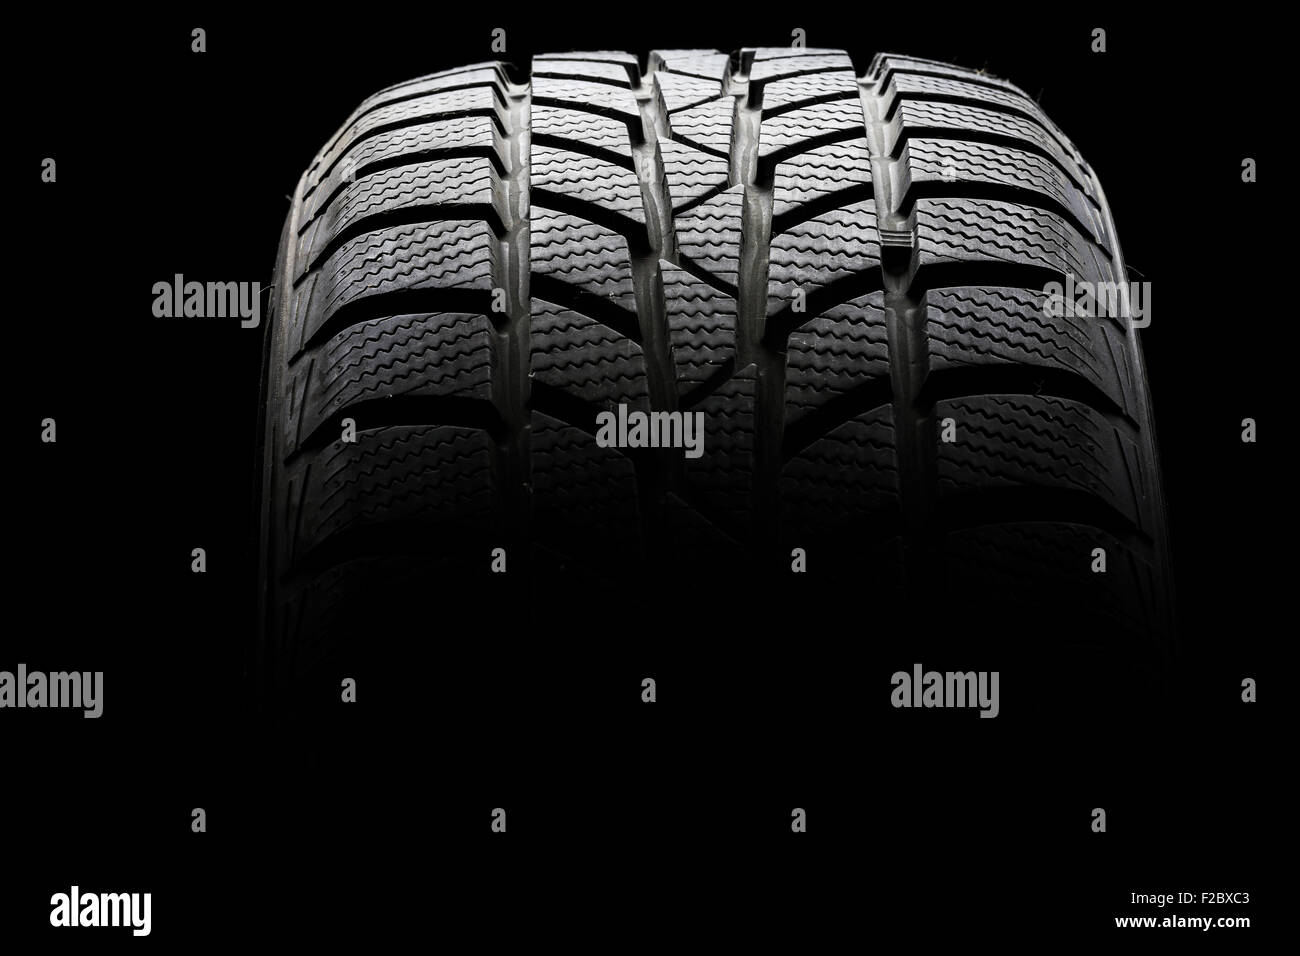 Studio shot of a black car tire in a dark ambient on black background Stock Photo